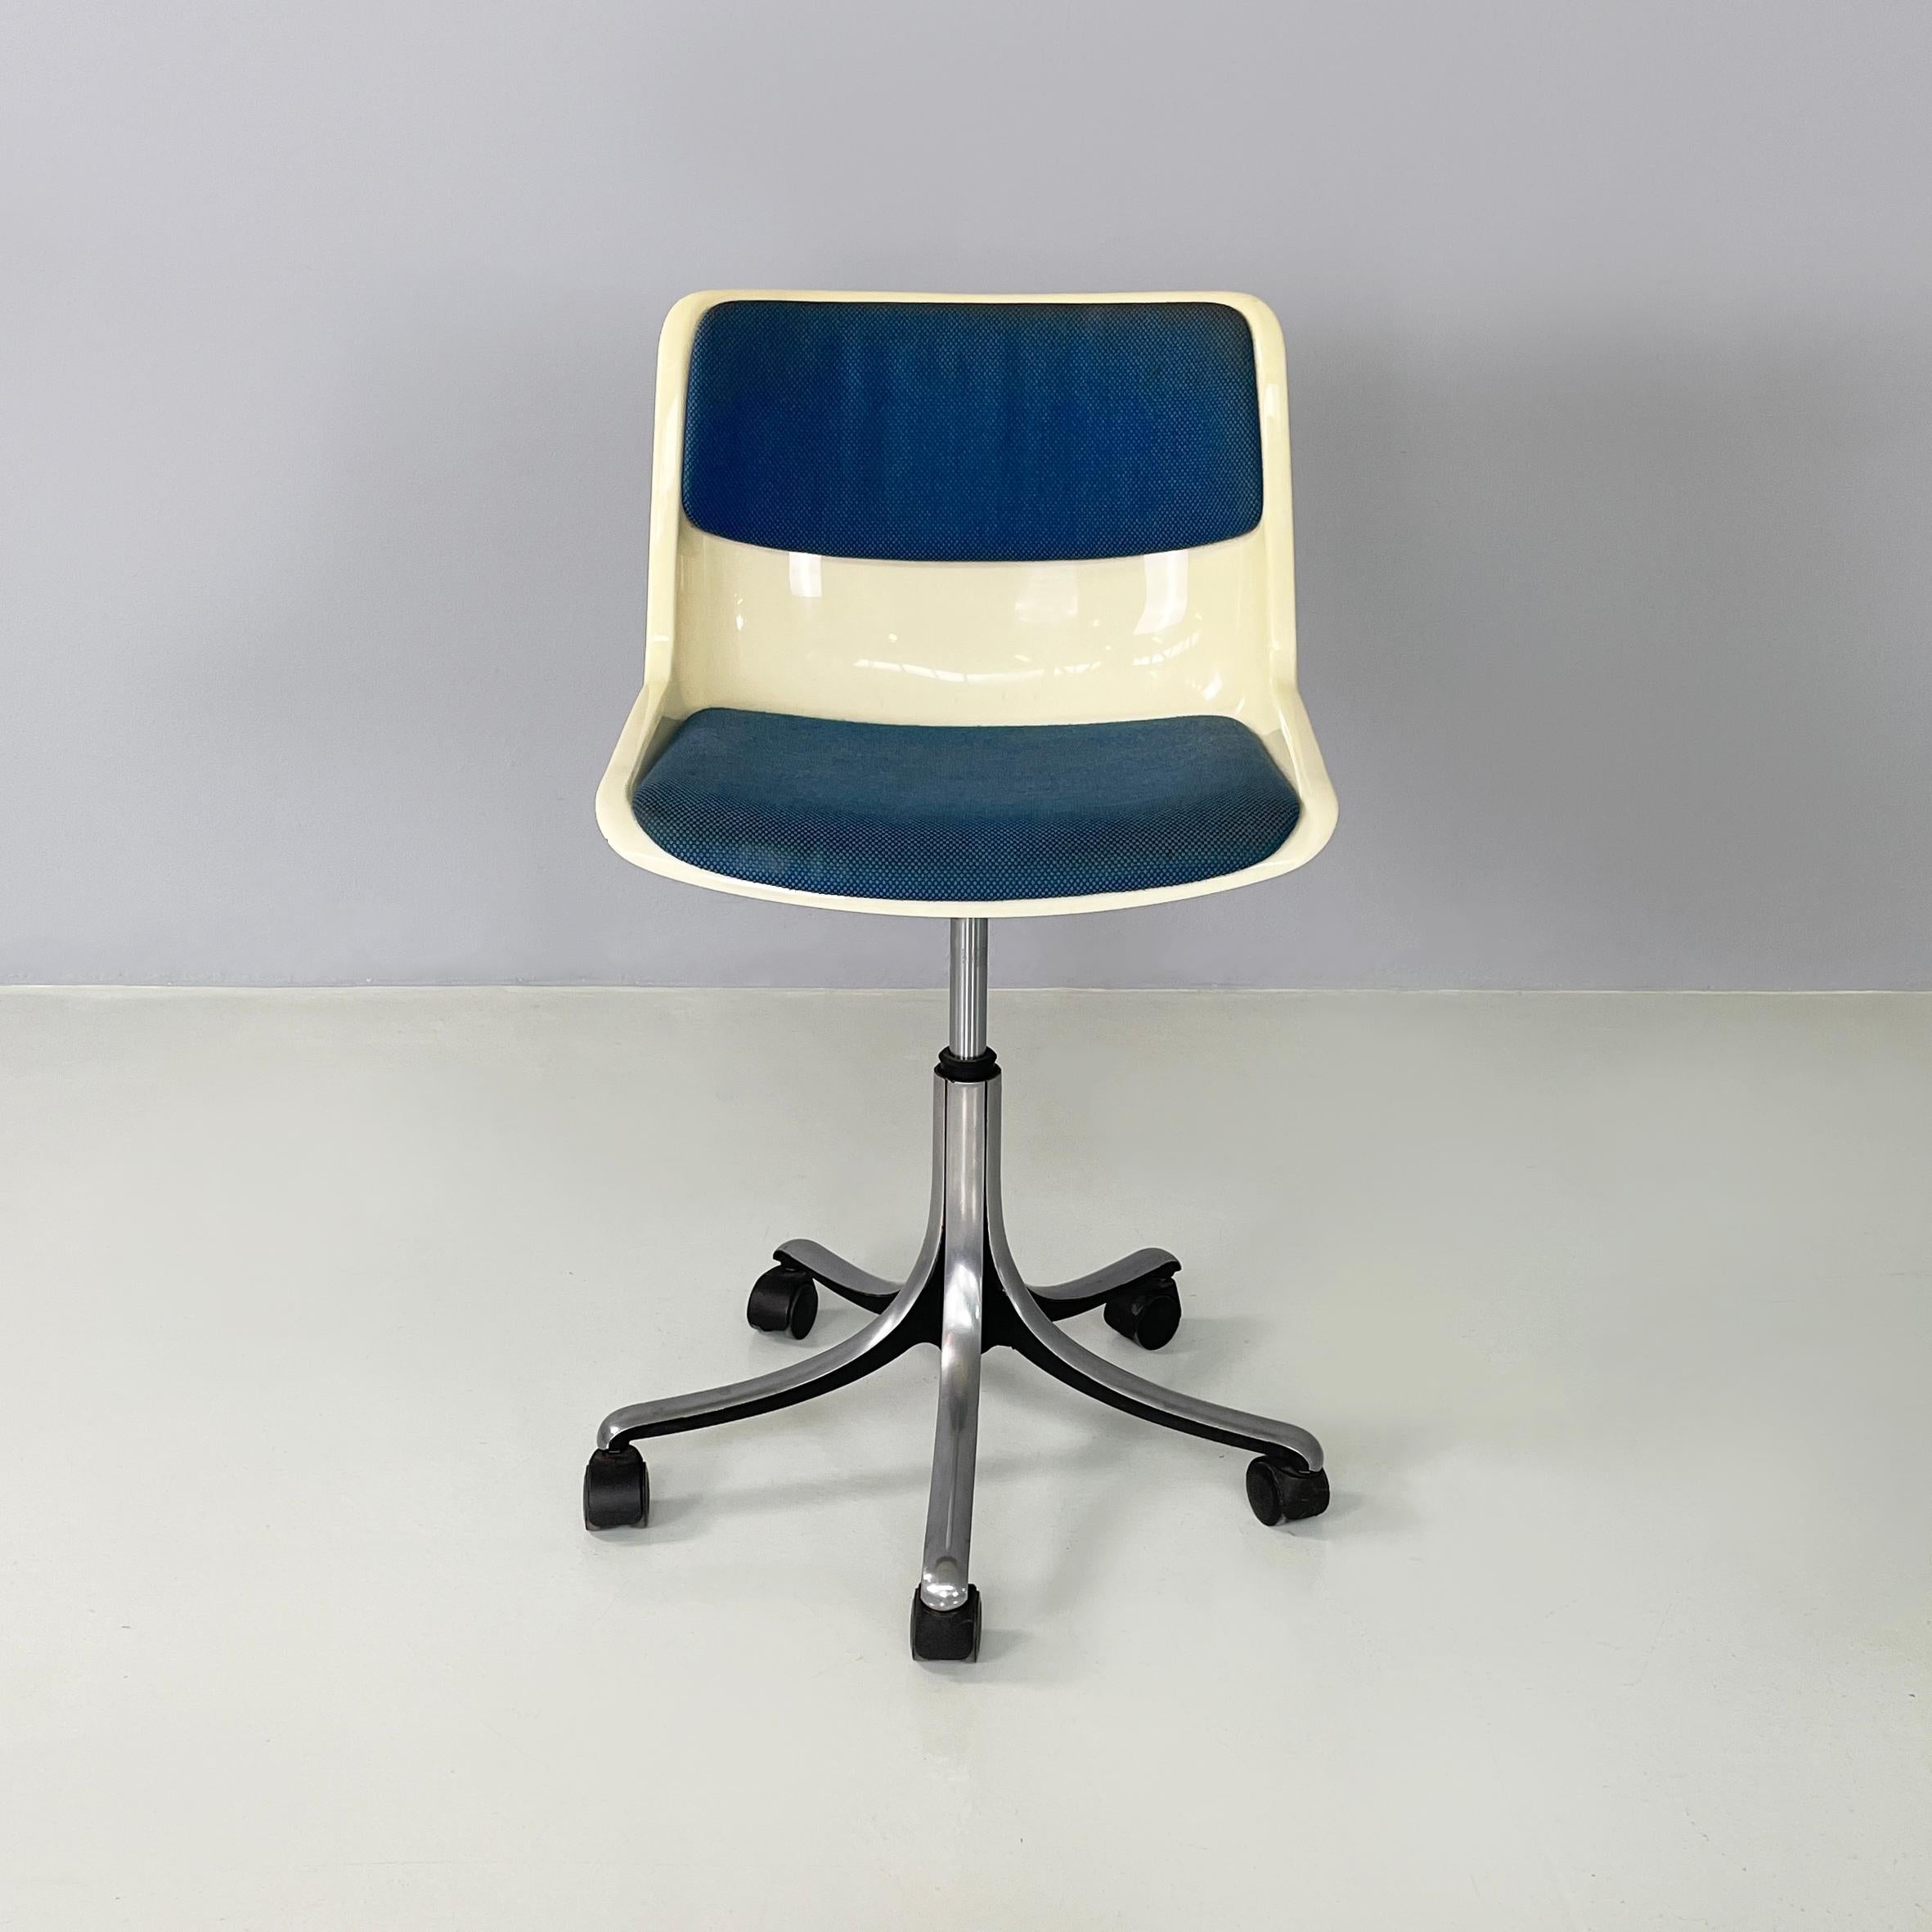 Italian modern Adjustable office chair Modus by Osvaldo Borsano for Tecno, 1980s
Office or desk chair mod. Modus with seat and backrest in ivory-white plastic monocoque. On the seat and backrest there is also a padded cushion, covered in blue